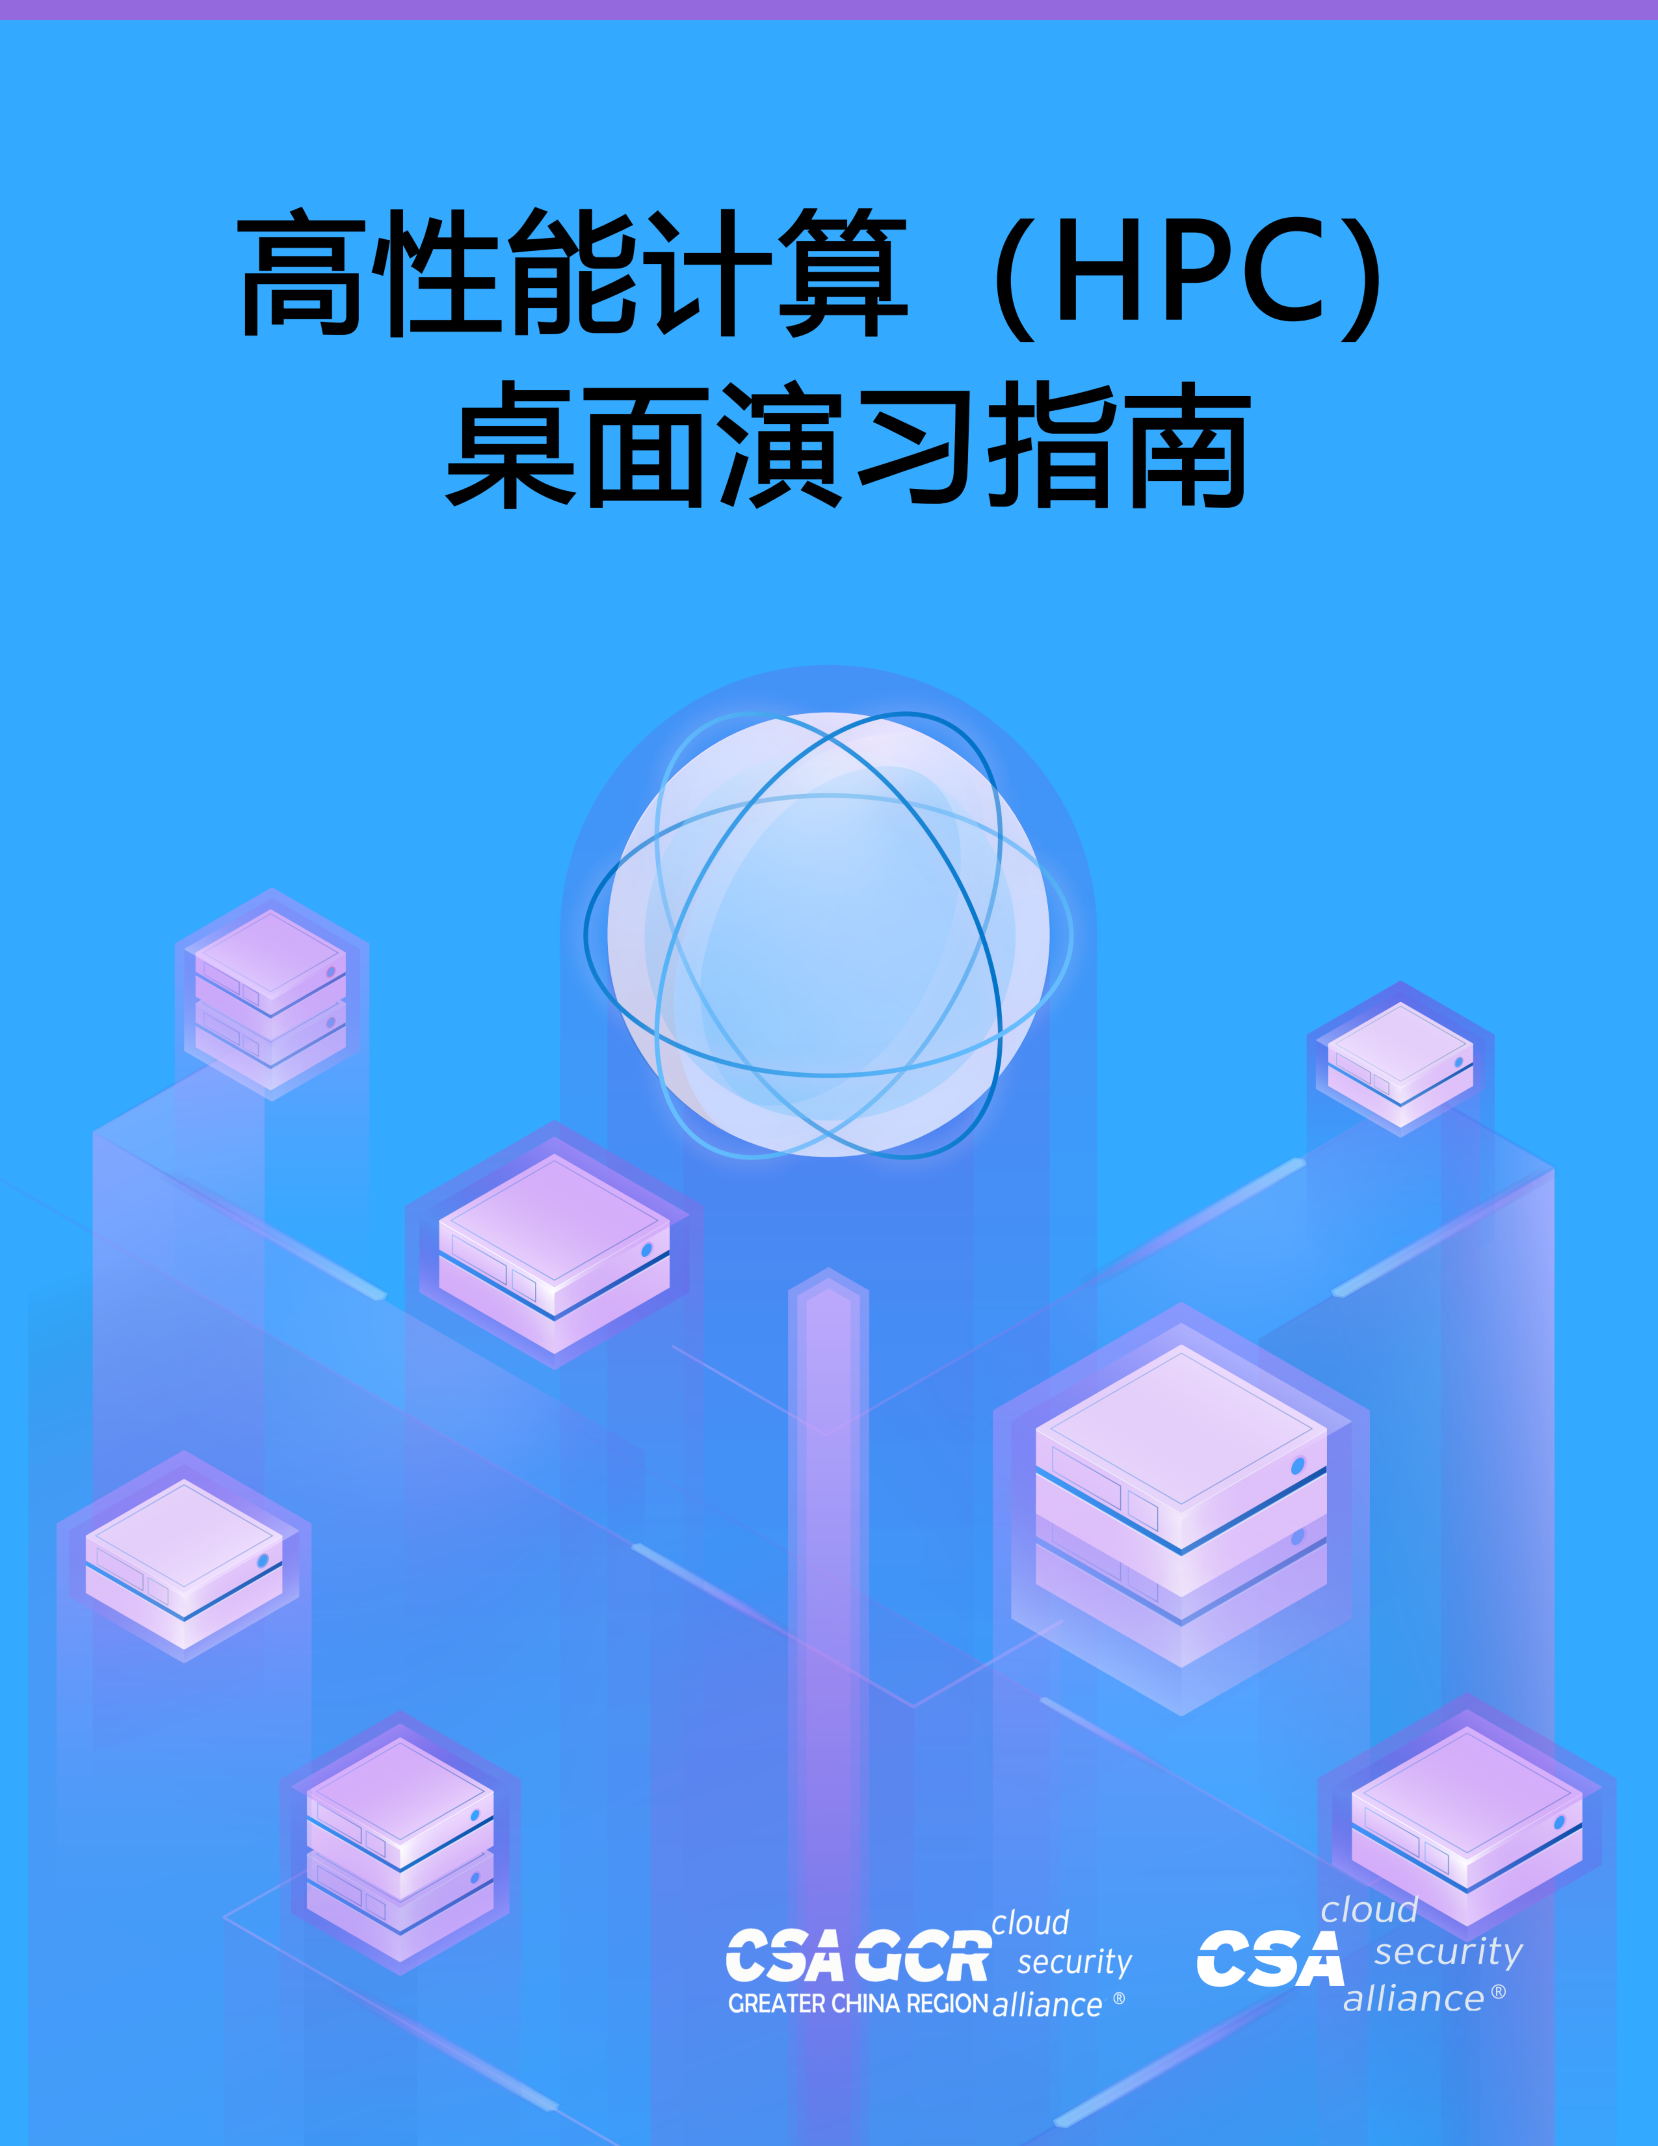 High Performance Computing Tabletop Guide - Chinese Translation